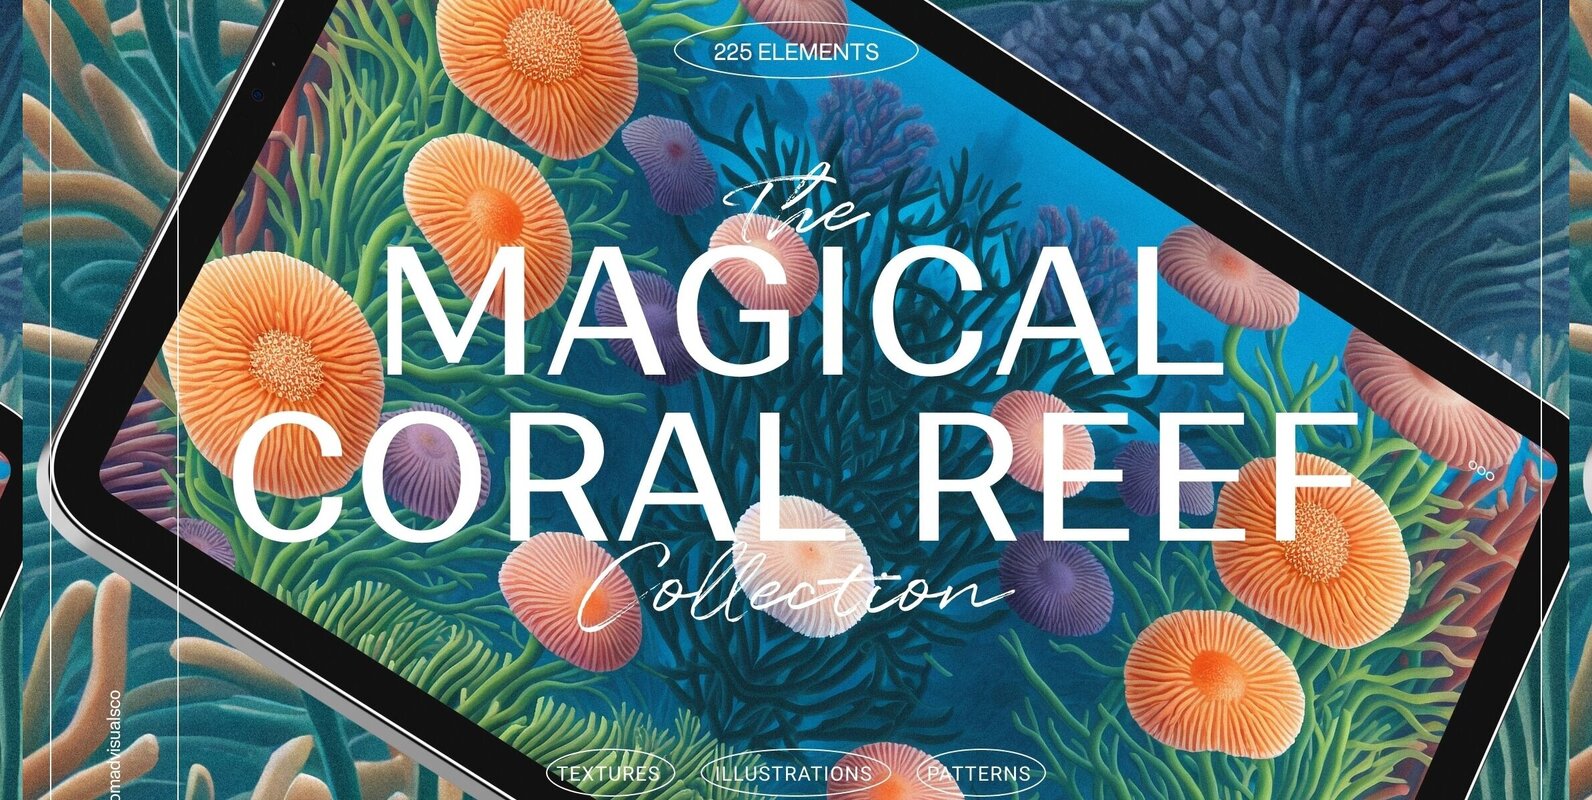 Magical Coral Reef